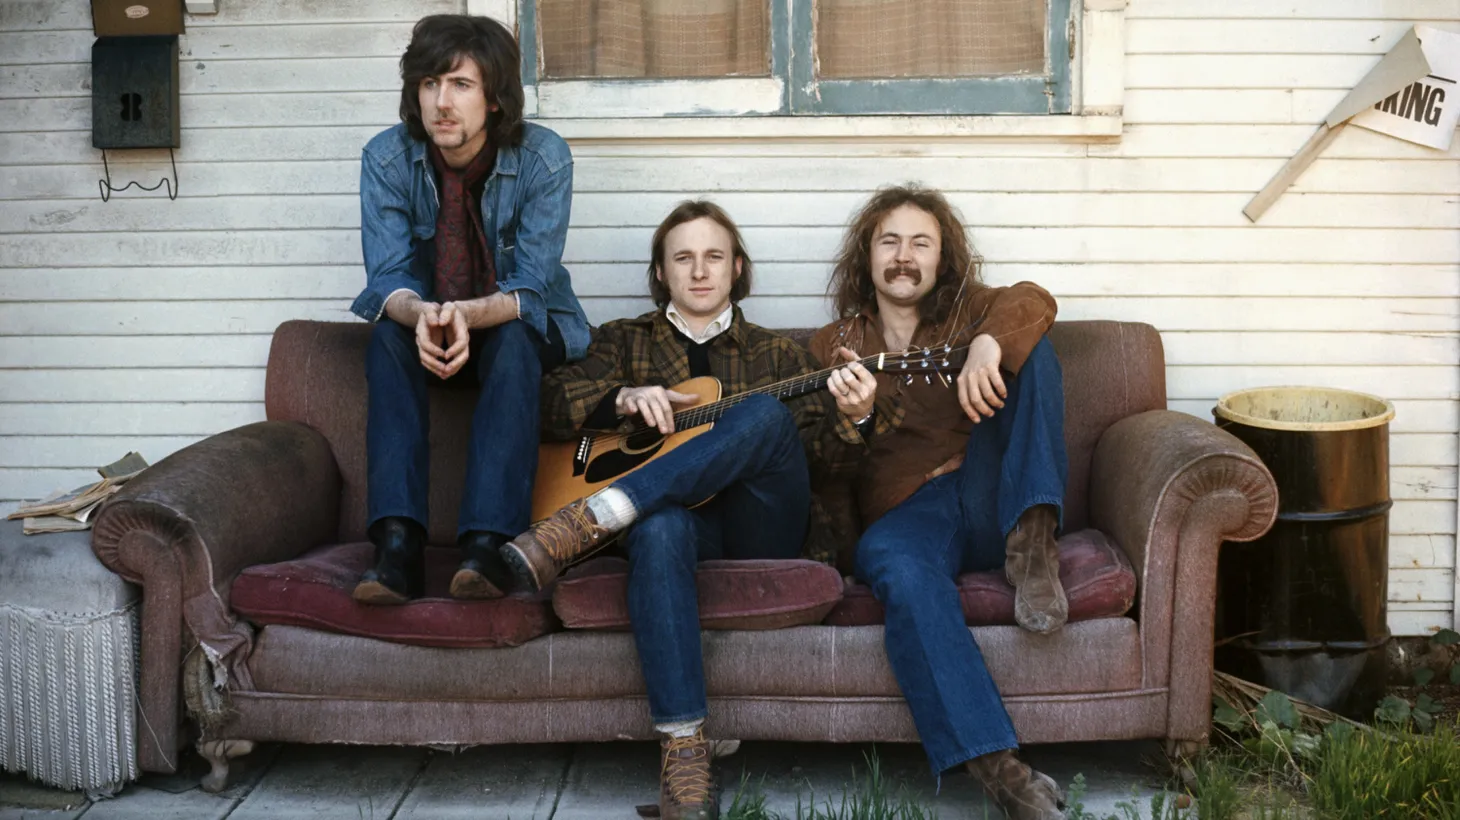 (L-R) Graham Nash, Stephen Stills, and David Crosby pose on a couch for their debut album cover.